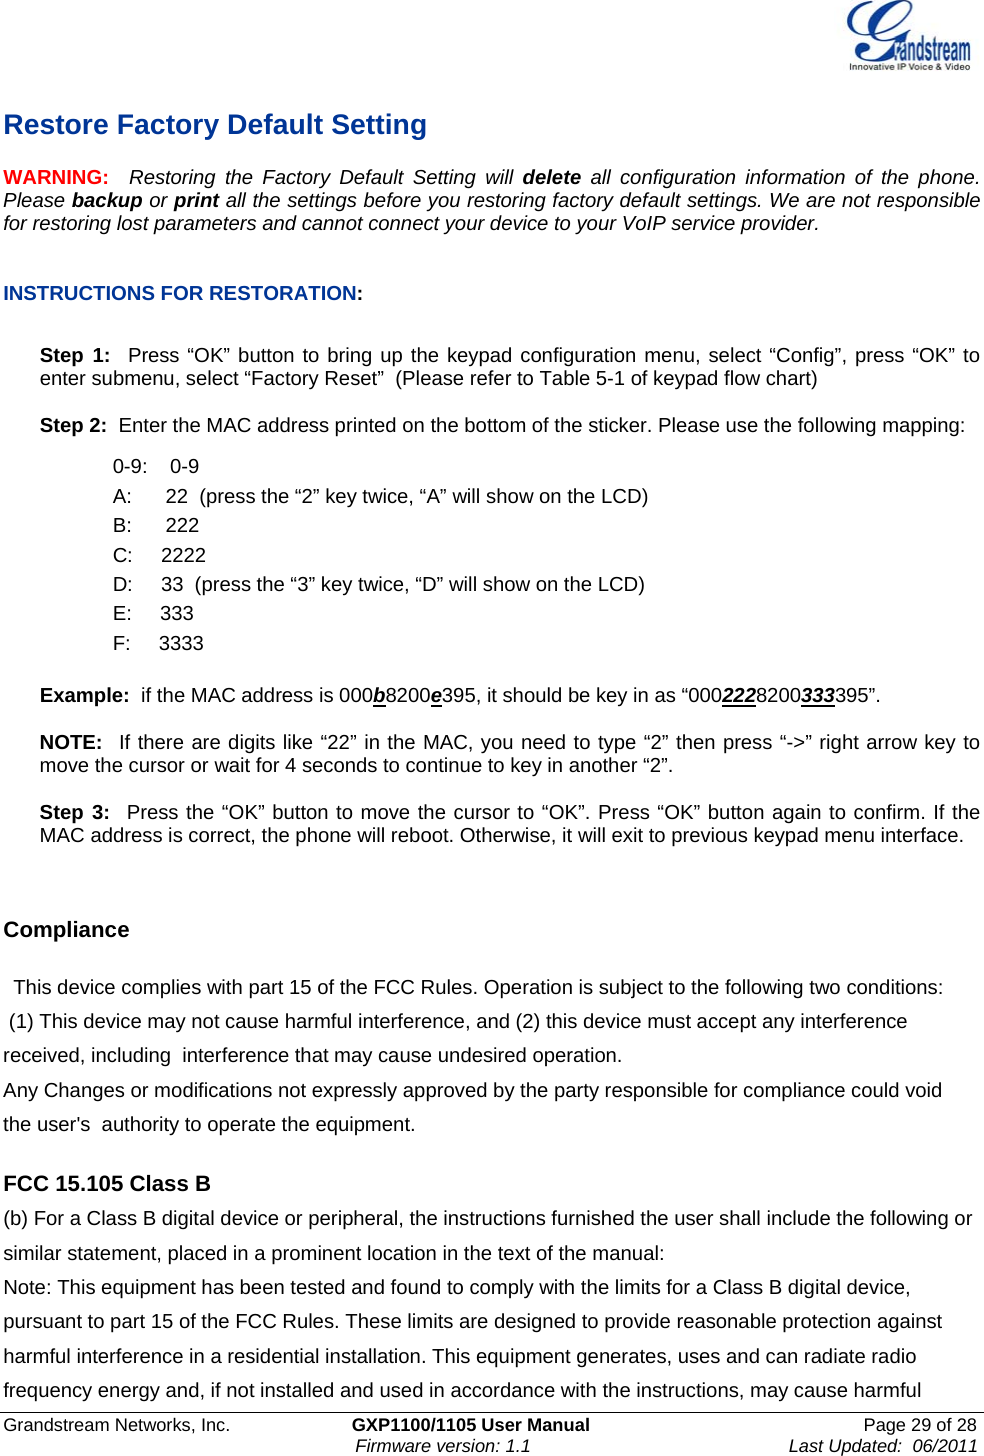    Grandstream Networks, Inc.                        GXP1100/1105 User Manual                                                      Page 29 of 28                                                                      Firmware version: 1.1                                                   Last Updated:  06/2011  Restore Factory Default Setting WARNING:  Restoring the Factory Default Setting will delete all configuration information of the phone. Please backup or print all the settings before you restoring factory default settings. We are not responsible for restoring lost parameters and cannot connect your device to your VoIP service provider.   INSTRUCTIONS FOR RESTORATION:  Step 1:  Press “OK” button to bring up the keypad configuration menu, select “Config”, press “OK” to enter submenu, select “Factory Reset”  (Please refer to Table 5-1 of keypad flow chart)  Step 2:  Enter the MAC address printed on the bottom of the sticker. Please use the following mapping:  0-9:    0-9 A:      22  (press the “2” key twice, “A” will show on the LCD) B:      222 C:     2222 D:     33  (press the “3” key twice, “D” will show on the LCD) E:     333 F:     3333  Example:  if the MAC address is 000b8200e395, it should be key in as “0002228200333395”.  NOTE:  If there are digits like “22” in the MAC, you need to type “2” then press “-&gt;” right arrow key to move the cursor or wait for 4 seconds to continue to key in another “2”.   Step 3:  Press the “OK” button to move the cursor to “OK”. Press “OK” button again to confirm. If the MAC address is correct, the phone will reboot. Otherwise, it will exit to previous keypad menu interface.     Compliance   This device complies with part 15 of the FCC Rules. Operation is subject to the following two conditions:  (1) This device may not cause harmful interference, and (2) this device must accept any interference received, including  interference that may cause undesired operation.    Any Changes or modifications not expressly approved by the party responsible for compliance could void the user&apos;s  authority to operate the equipment.    FCC 15.105 Class B (b) For a Class B digital device or peripheral, the instructions furnished the user shall include the following or similar statement, placed in a prominent location in the text of the manual: Note: This equipment has been tested and found to comply with the limits for a Class B digital device, pursuant to part 15 of the FCC Rules. These limits are designed to provide reasonable protection against harmful interference in a residential installation. This equipment generates, uses and can radiate radio frequency energy and, if not installed and used in accordance with the instructions, may cause harmful 